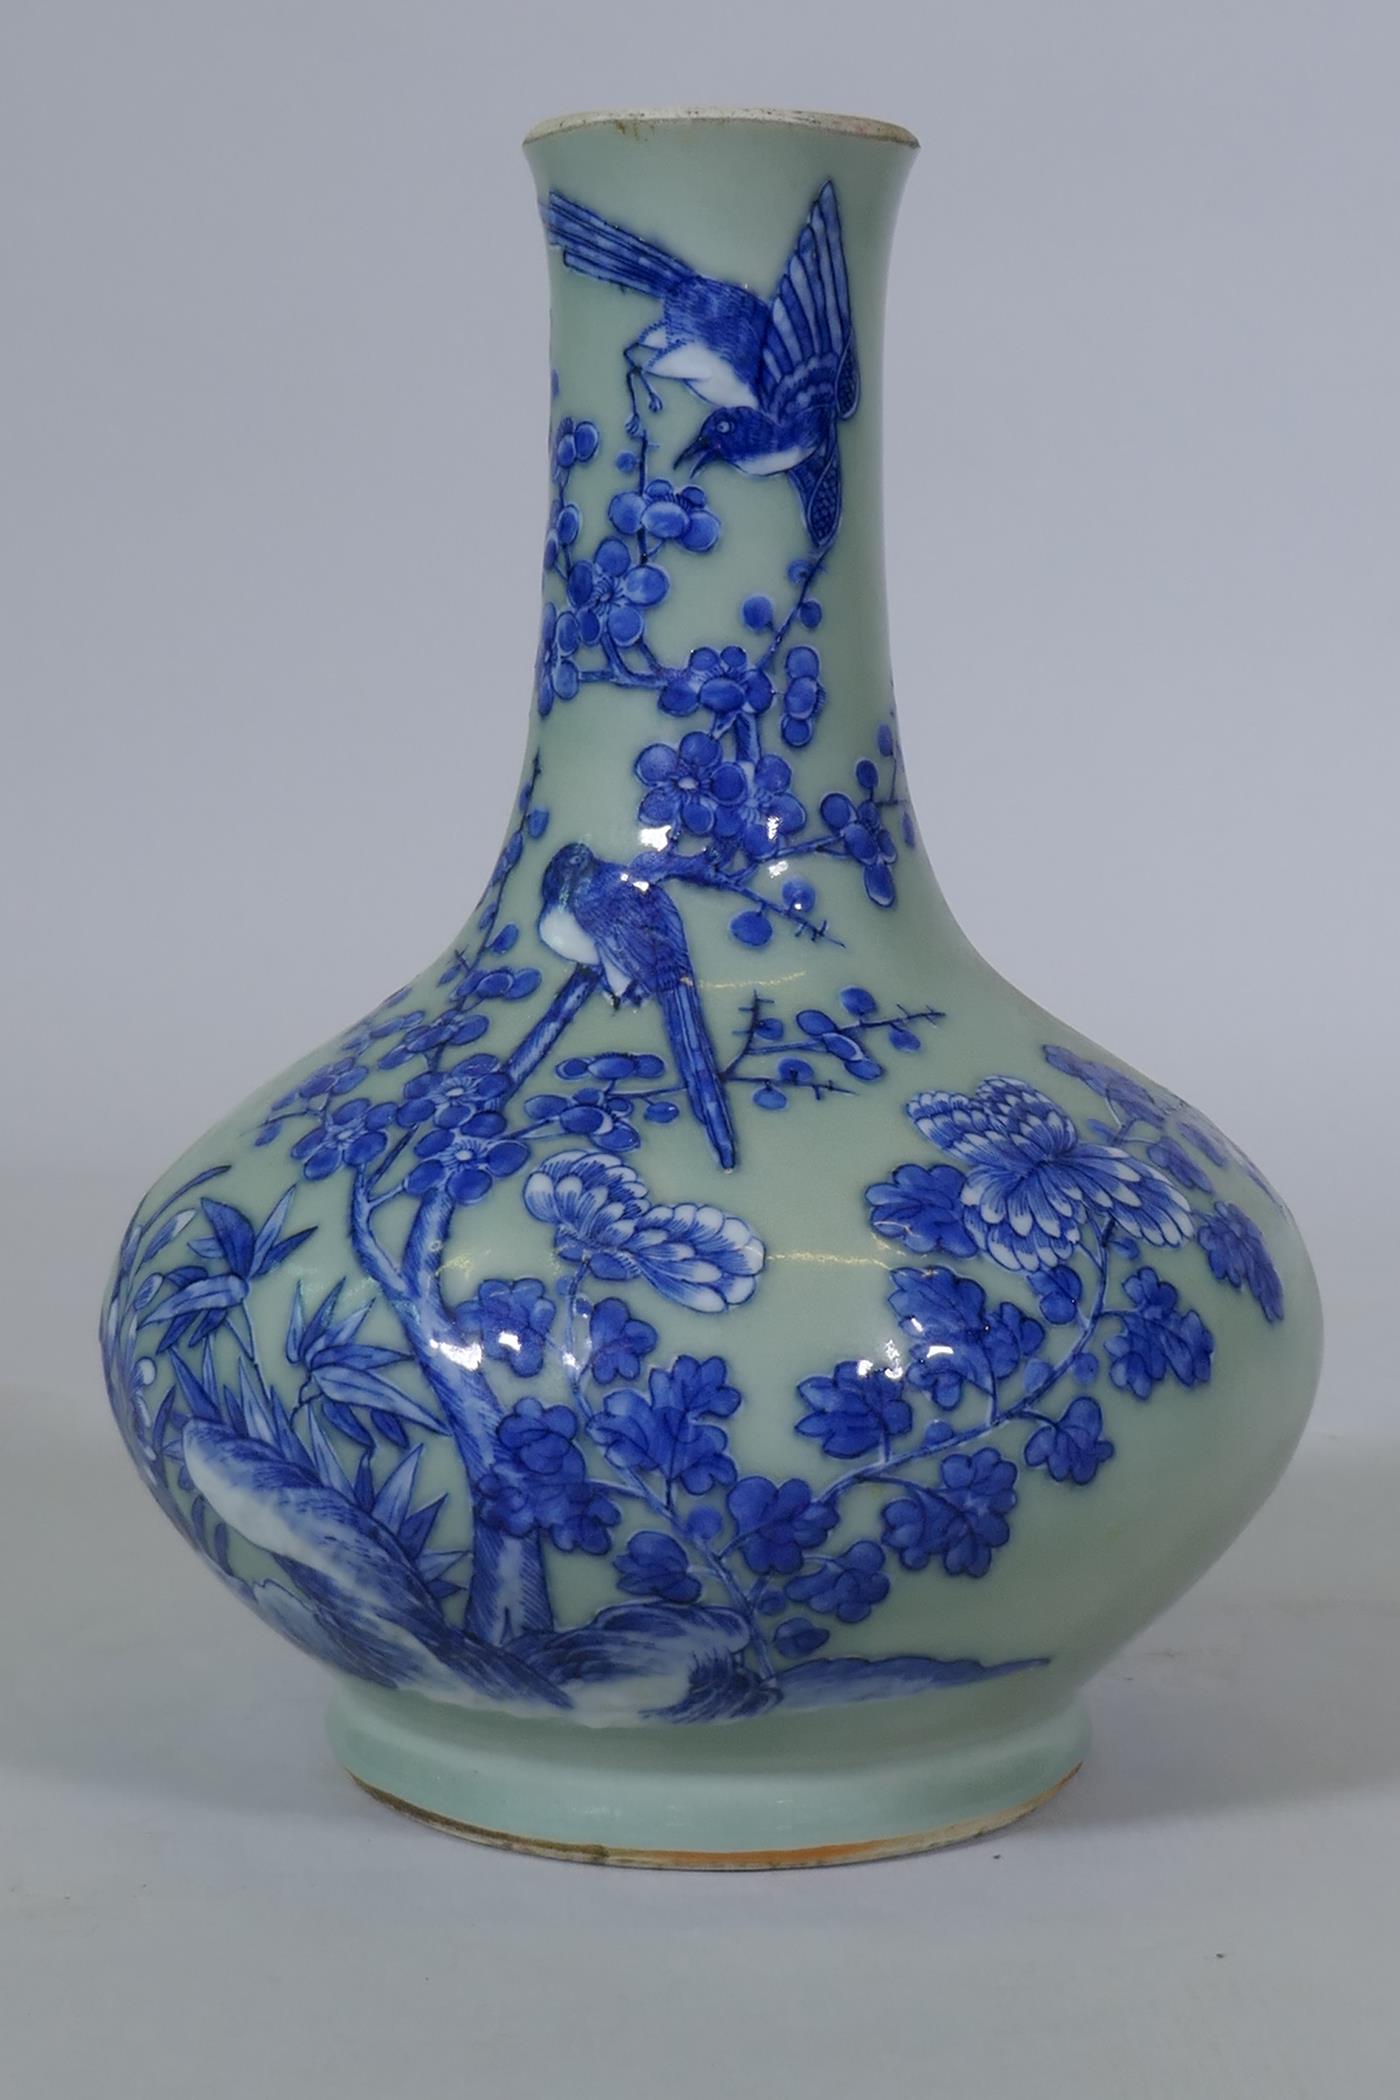 A Chinese celadon glazed vase with raised blue and white decoration of birds and bats, C19th/